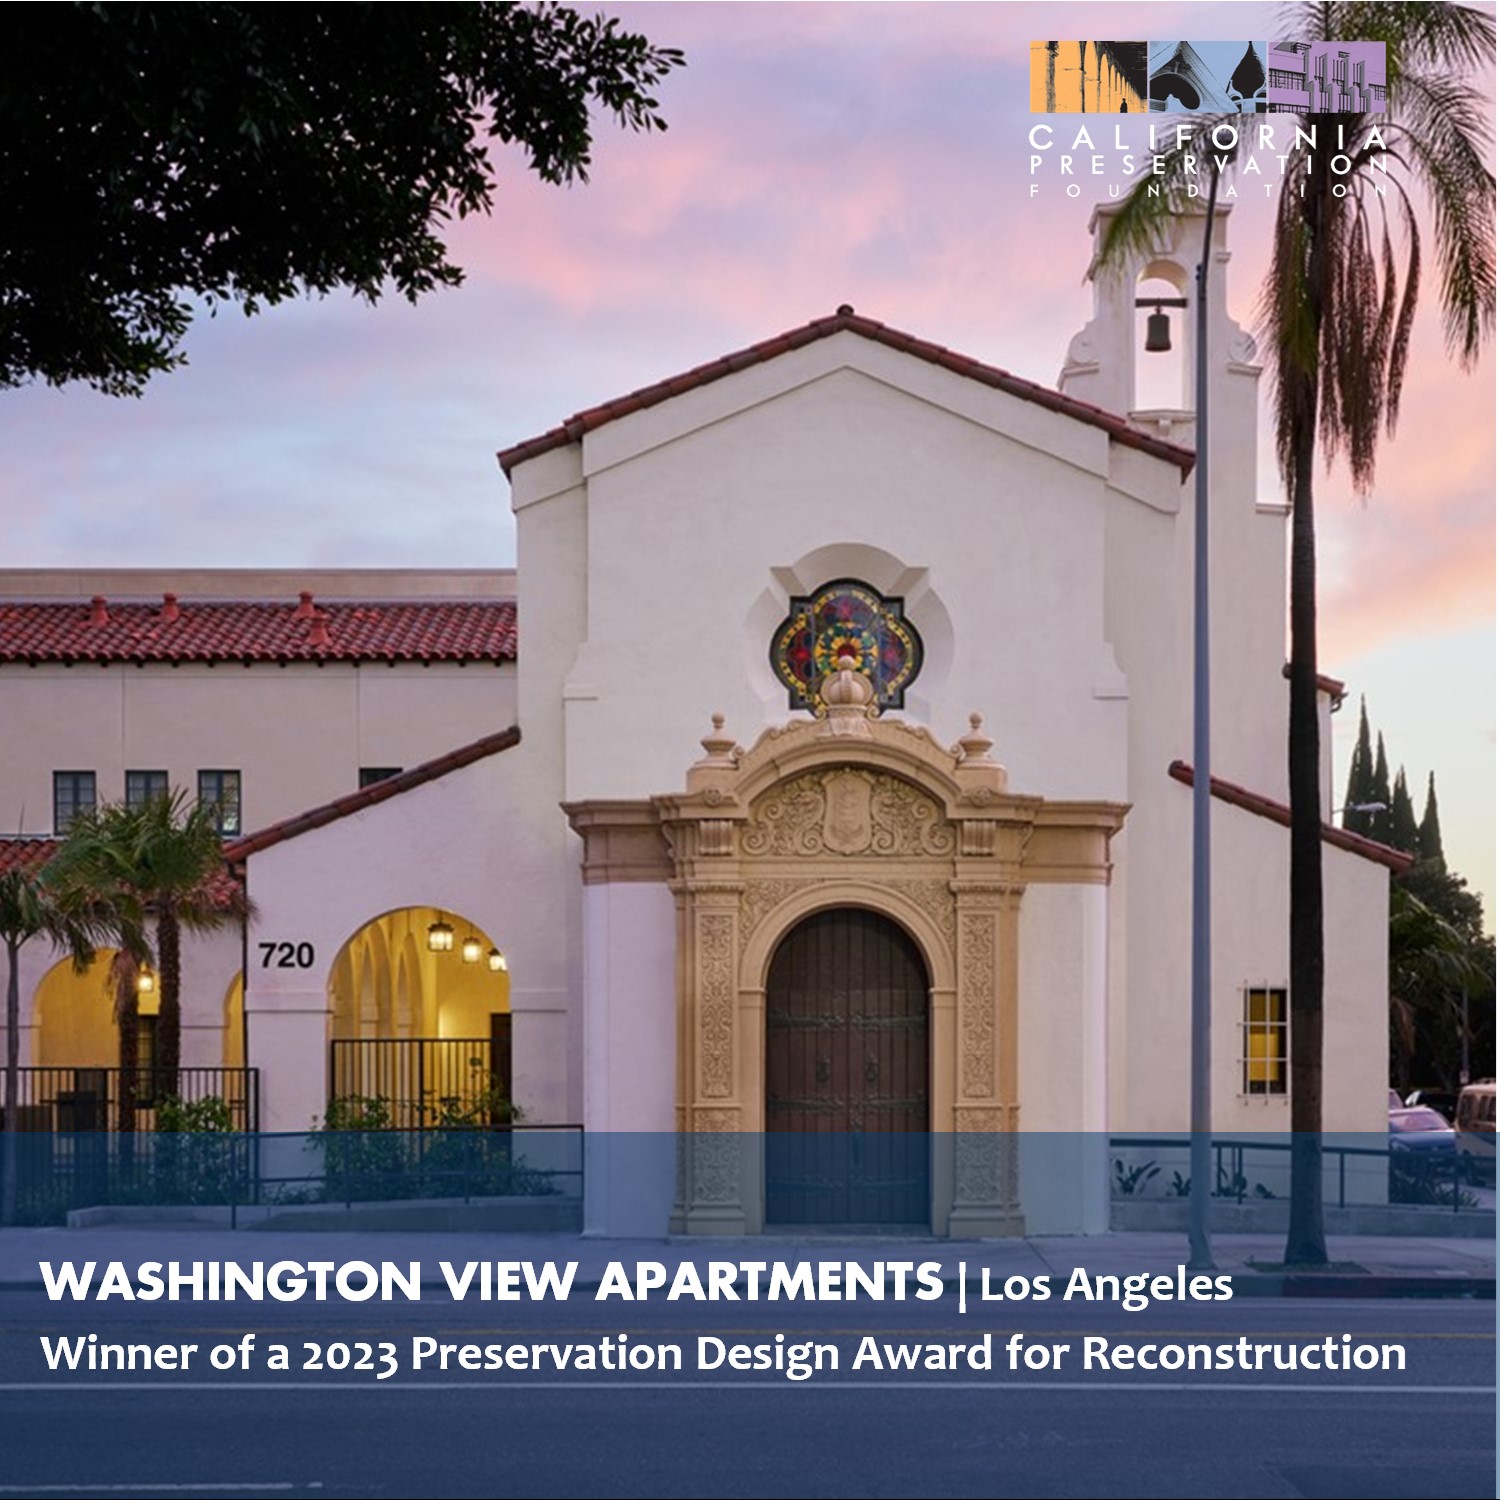 Front entrance of Washington View Apartments. Text over picture states that it is the winner of a 2023 Preservation Design Award for Reconstruction by the California Preservation Foundation.